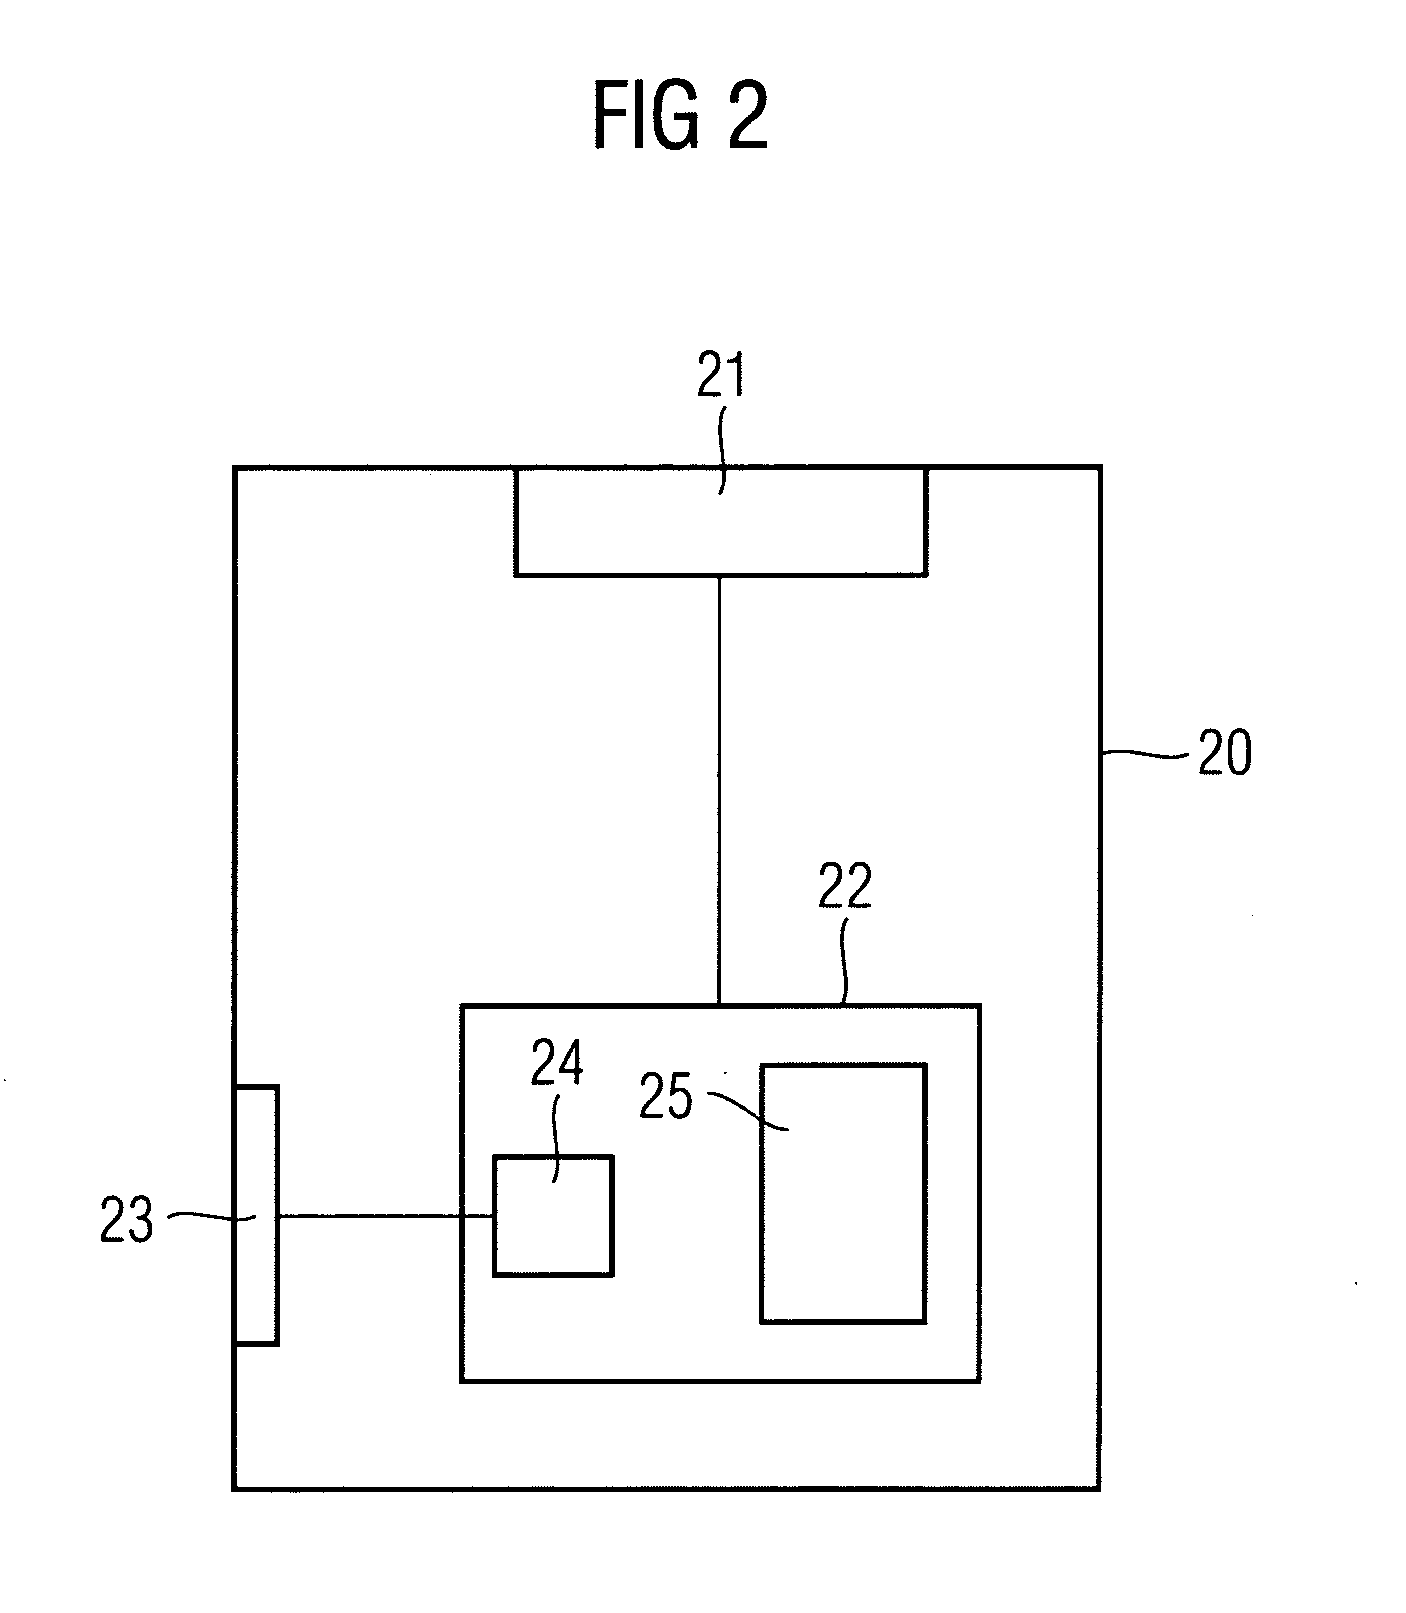 Memory device, memory controller and method for operating the same